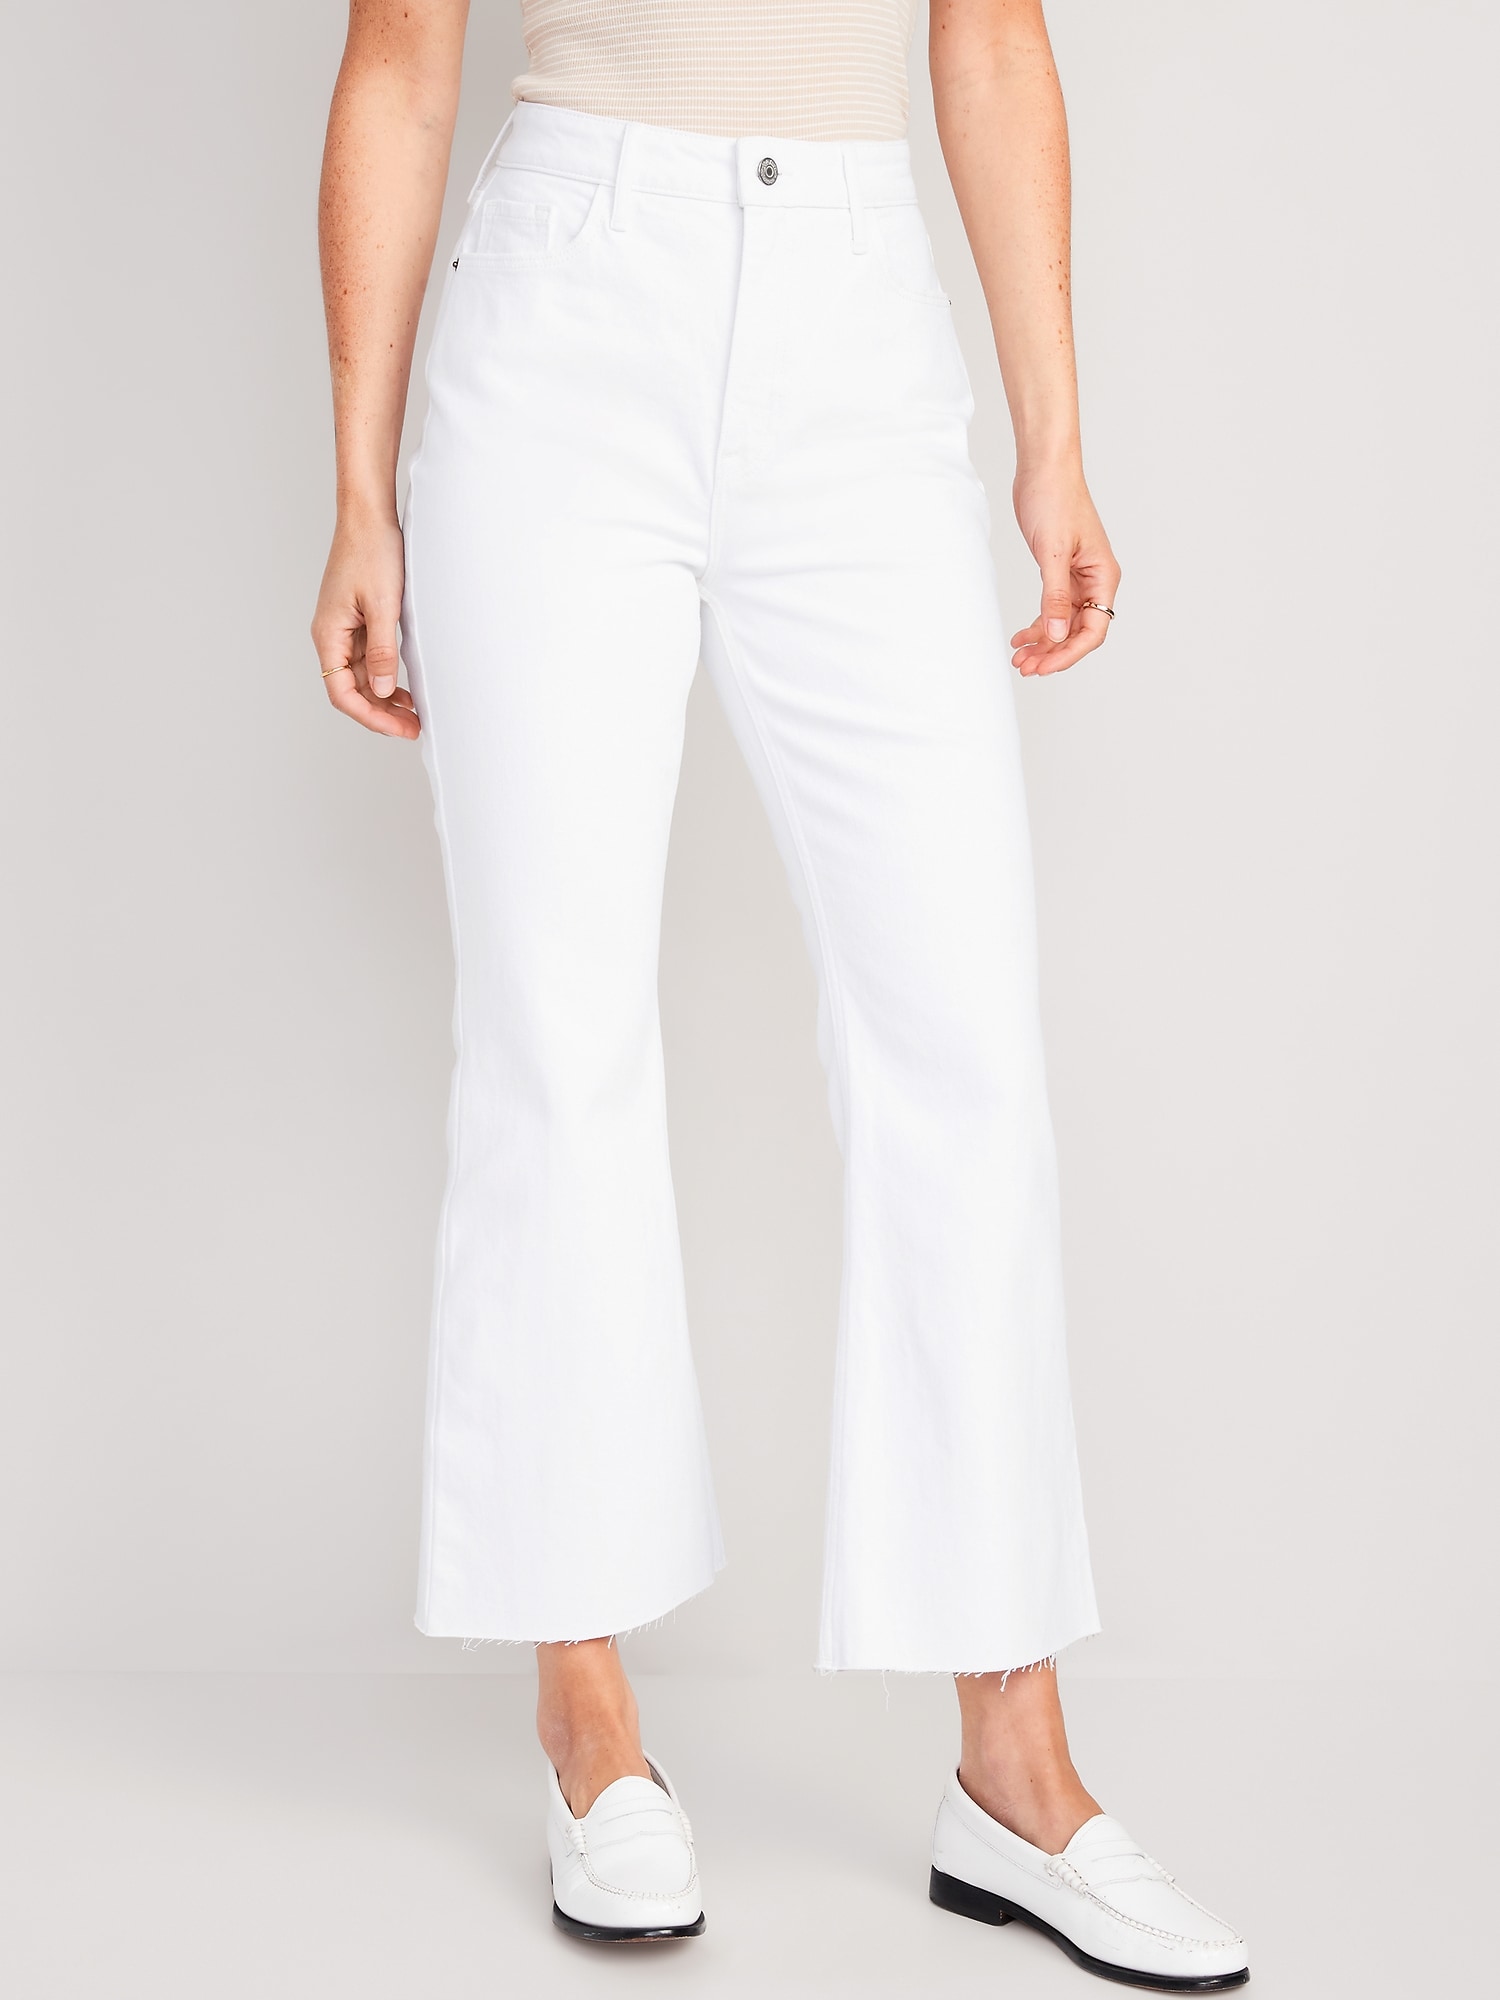 Higher High-Waisted White Cropped Cut-Off Flare Jeans